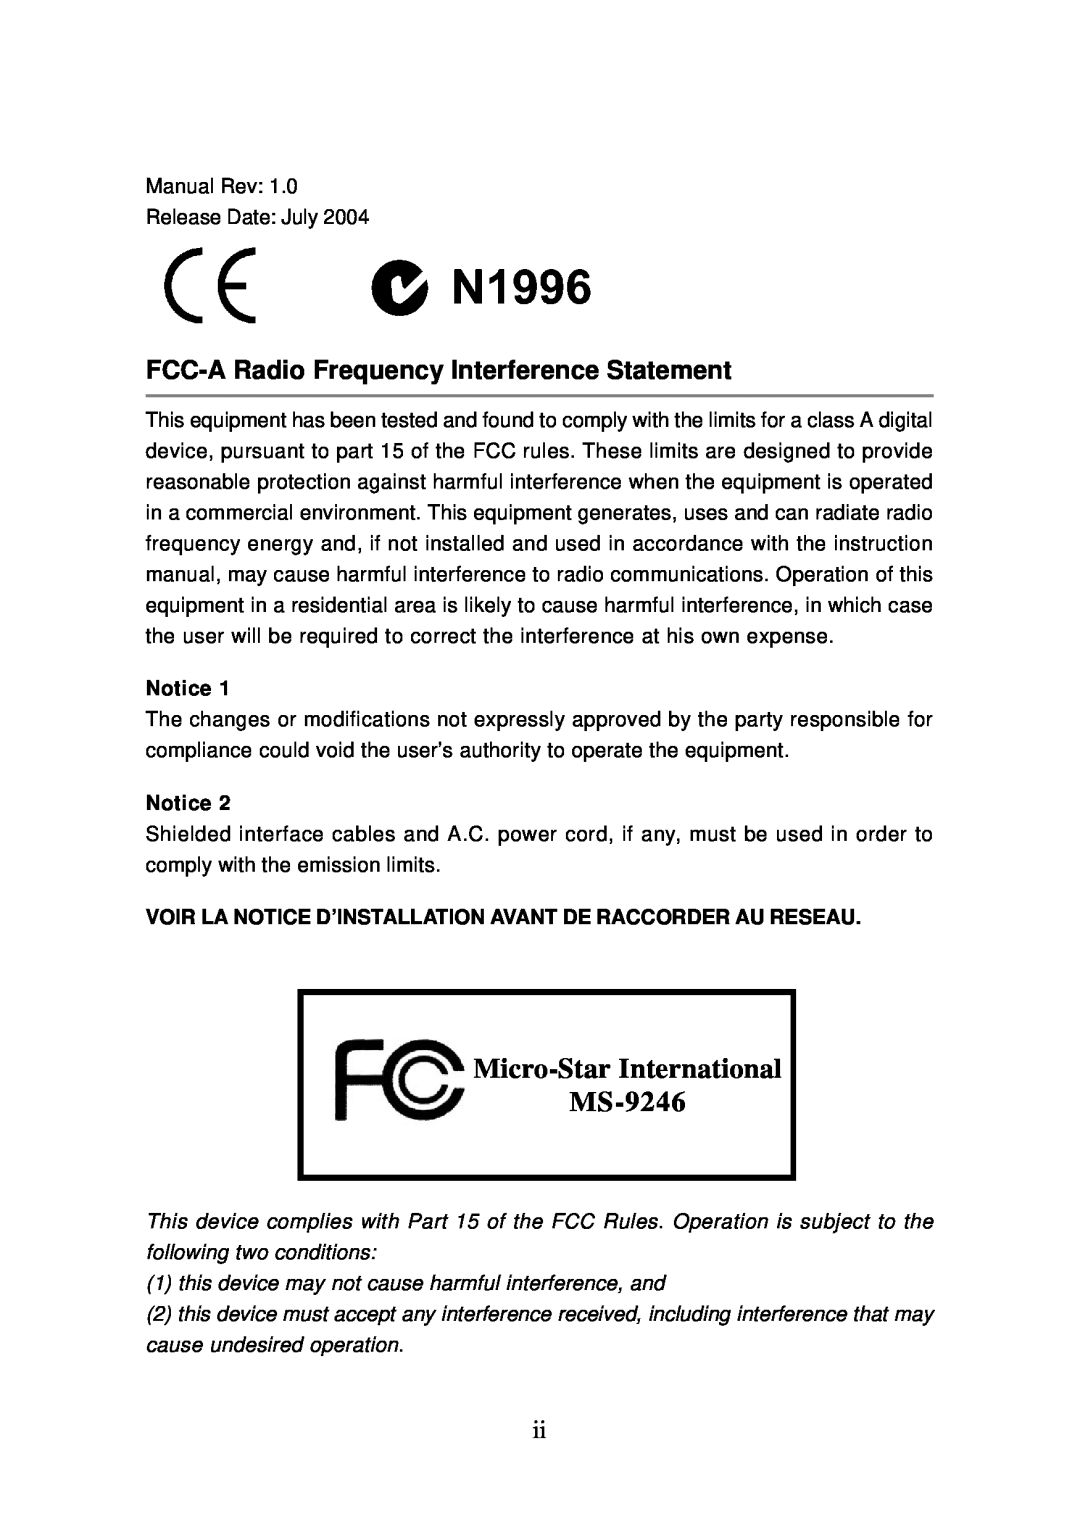 MSI manual Micro-Star International MS-9246, FCC-A Radio Frequency Interference Statement 